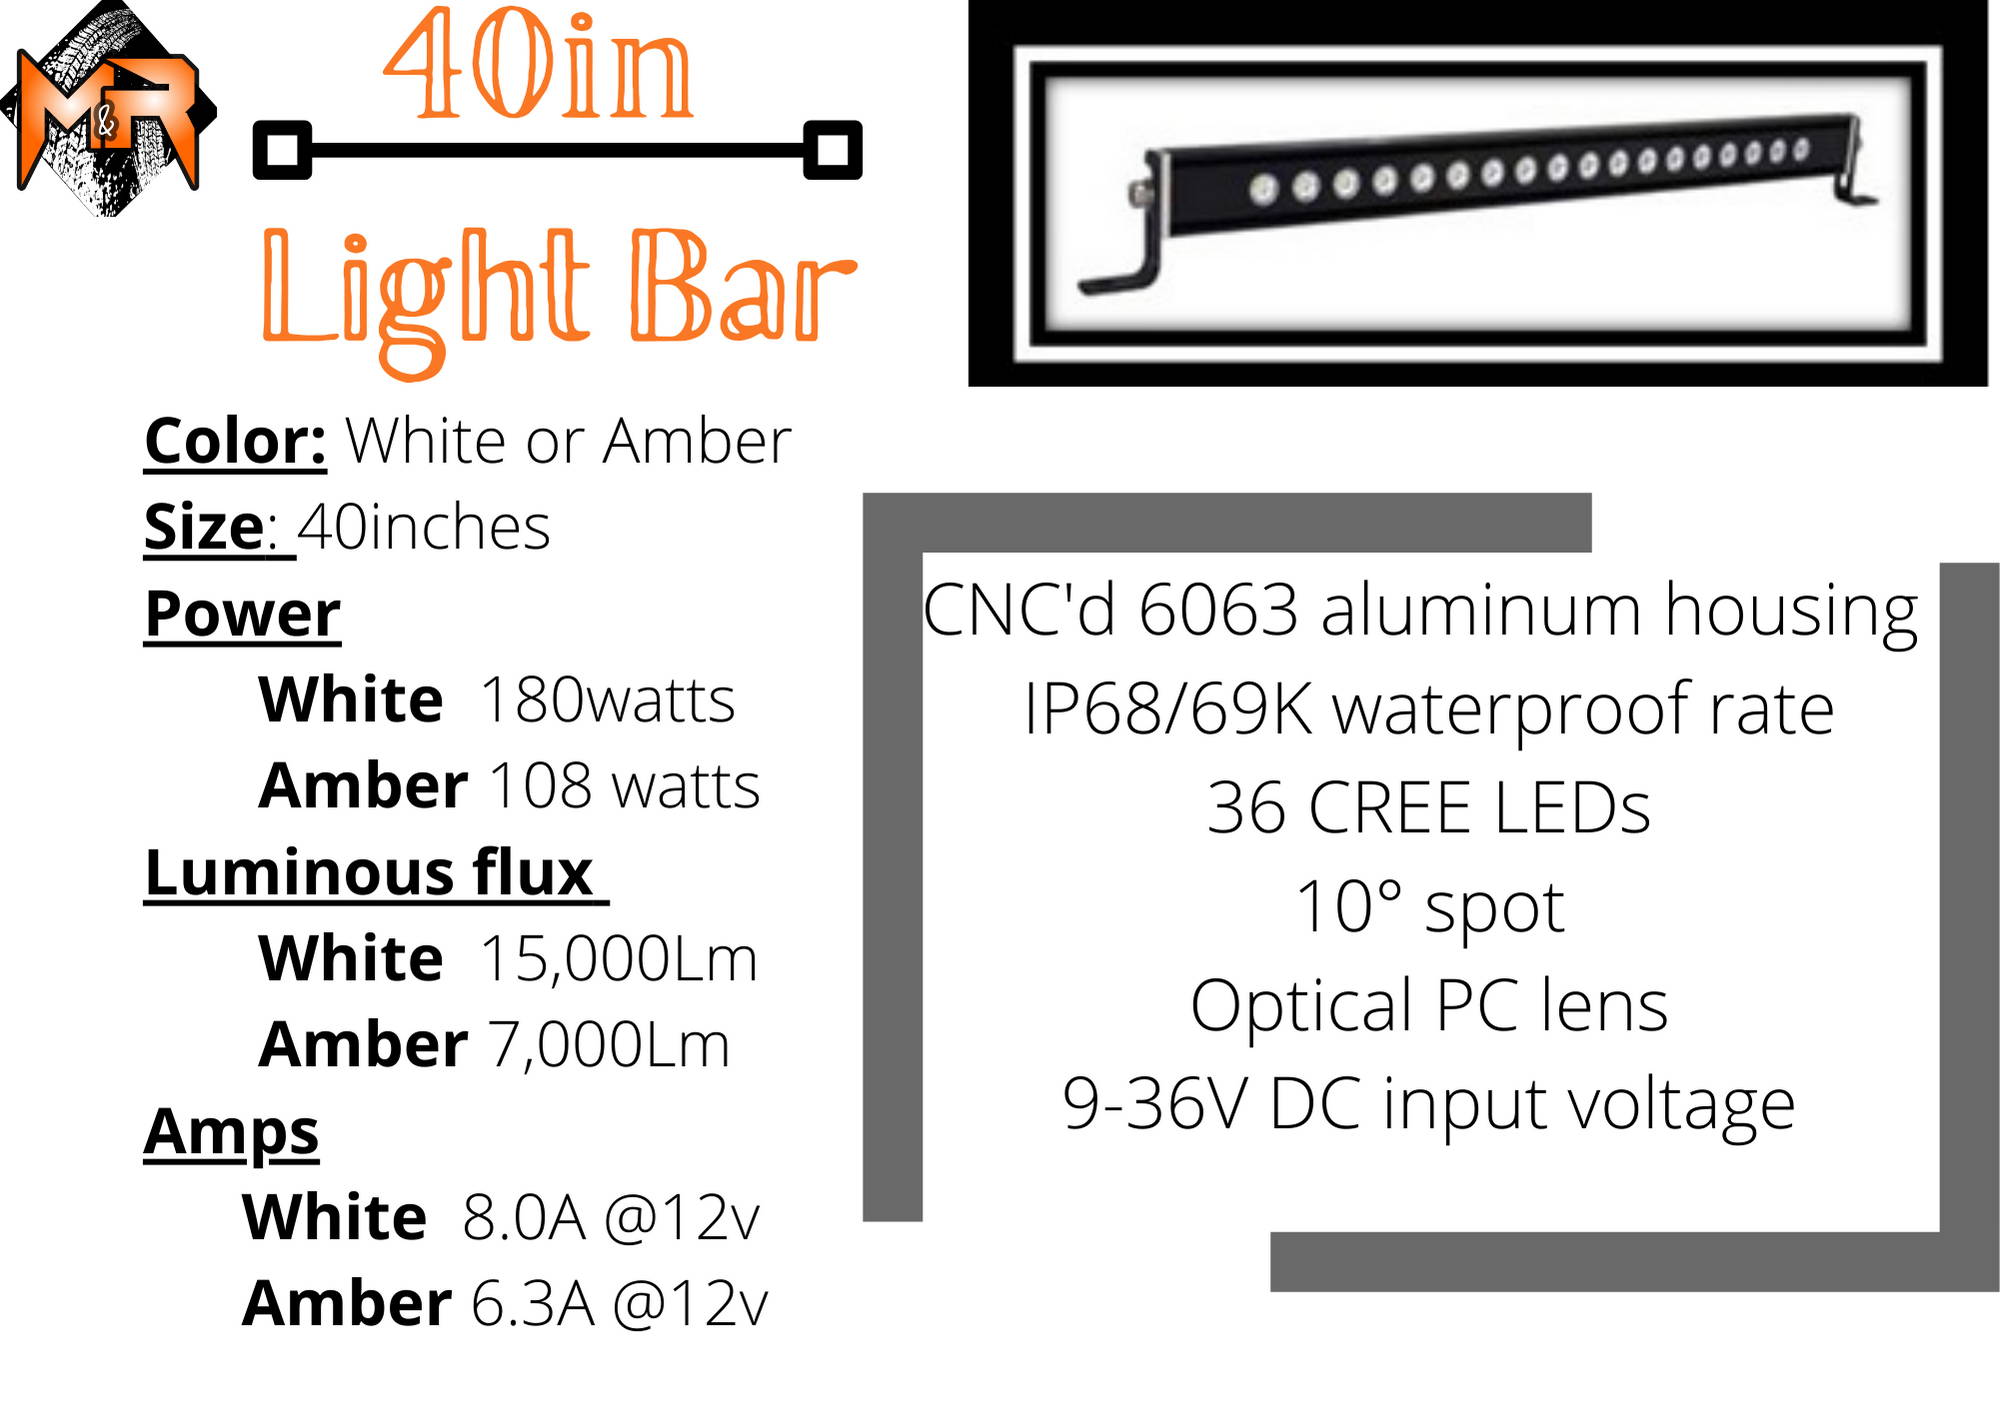 m&R automotive 30in light bar dimensions and details color white and amber